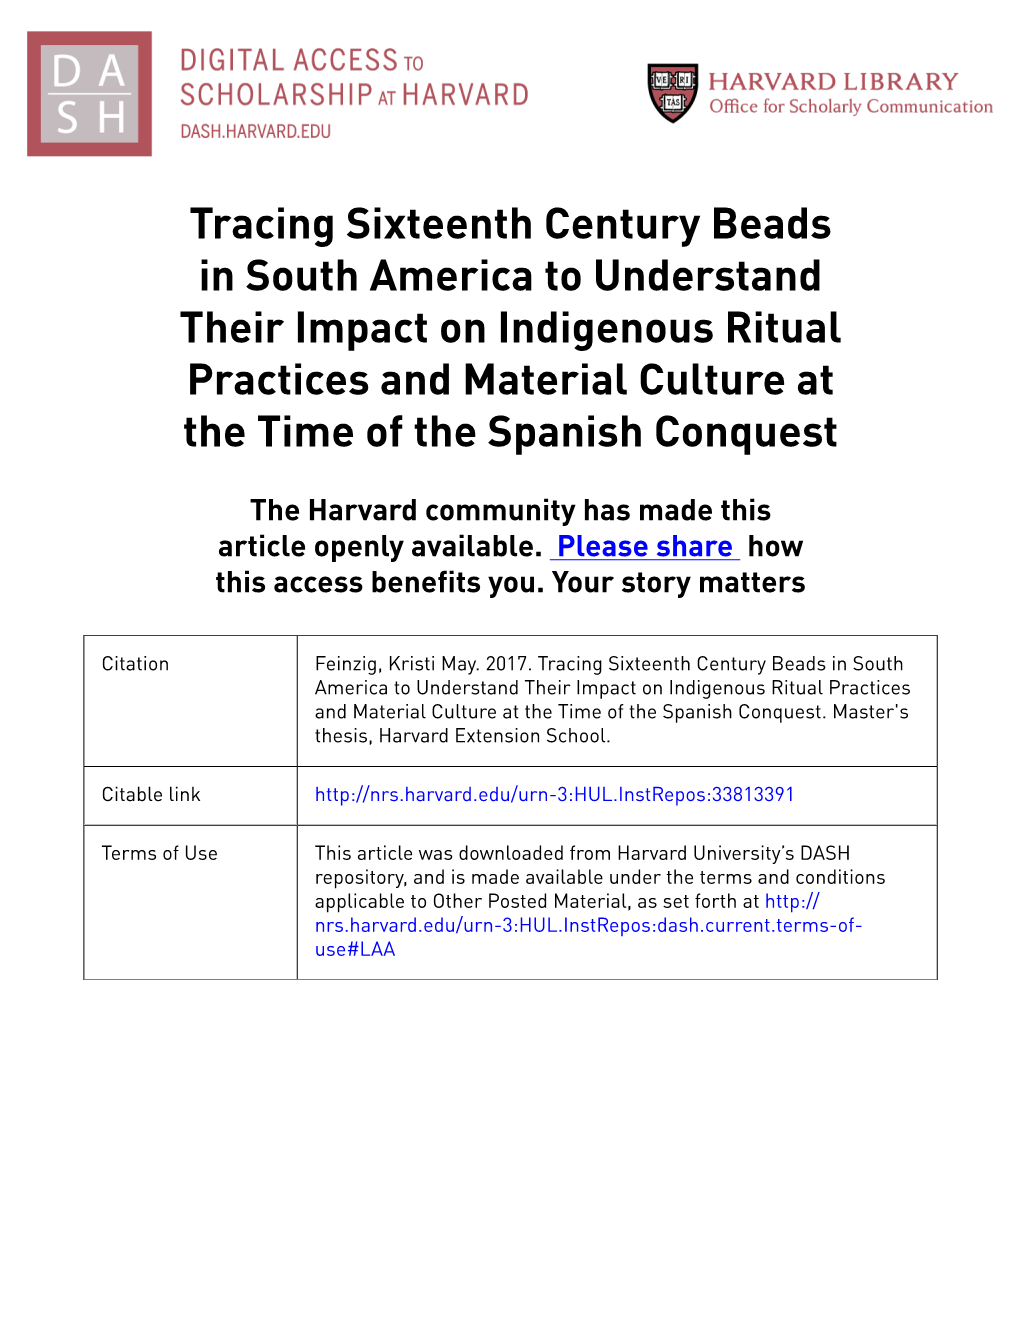 Tracing Sixteenth Century Beads in South America to Understand Their Impact on Indigenous Ritual Practices and Material Culture at the Time of the Spanish Conquest